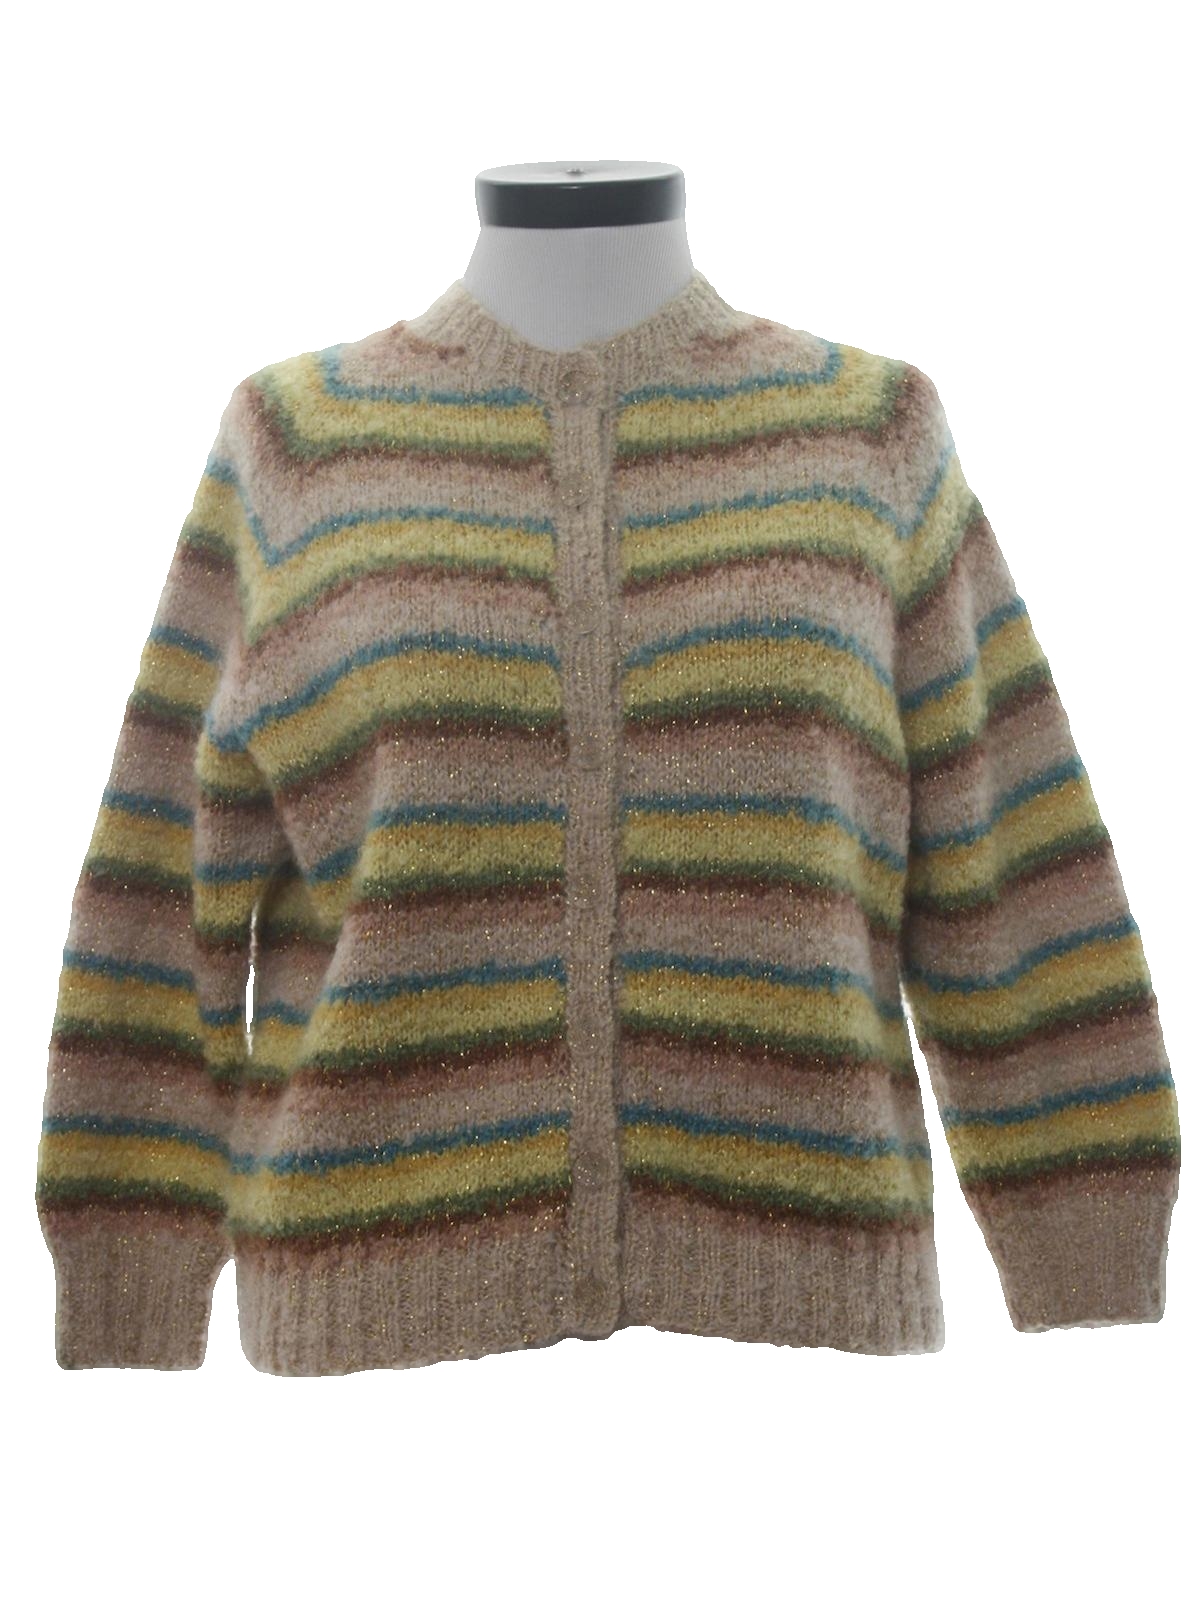 Retro 70s Sweater (Hand Knit) : 70s -Hand Knit- Womens beige taupe ...